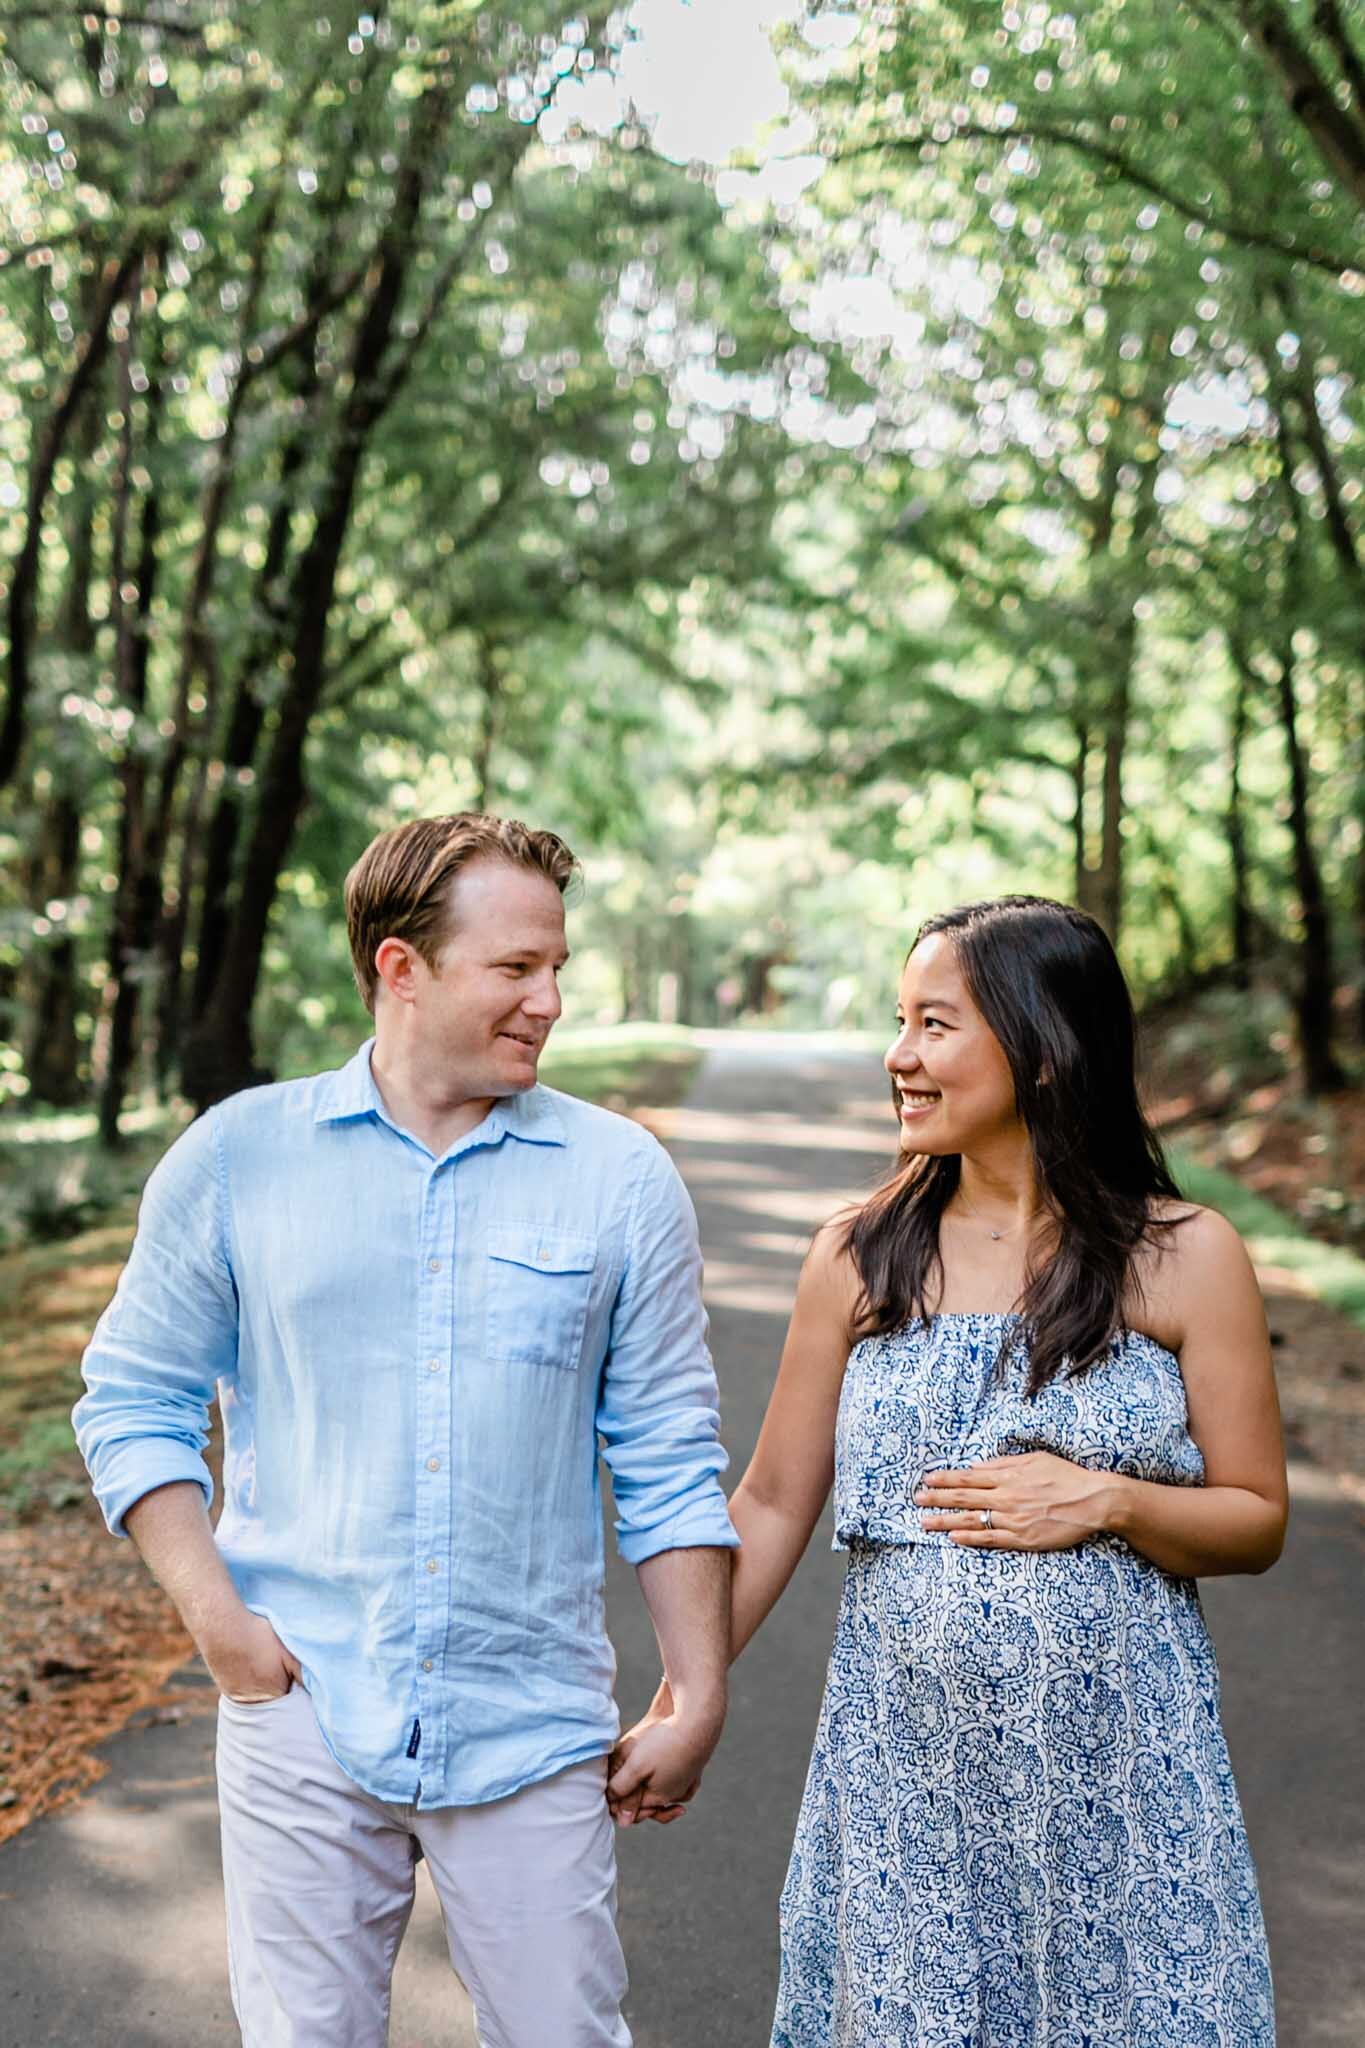 Raleigh Maternity Photographer | By G. Lin Photography | NCMA Maternity Photos | Couple walking down path of trees